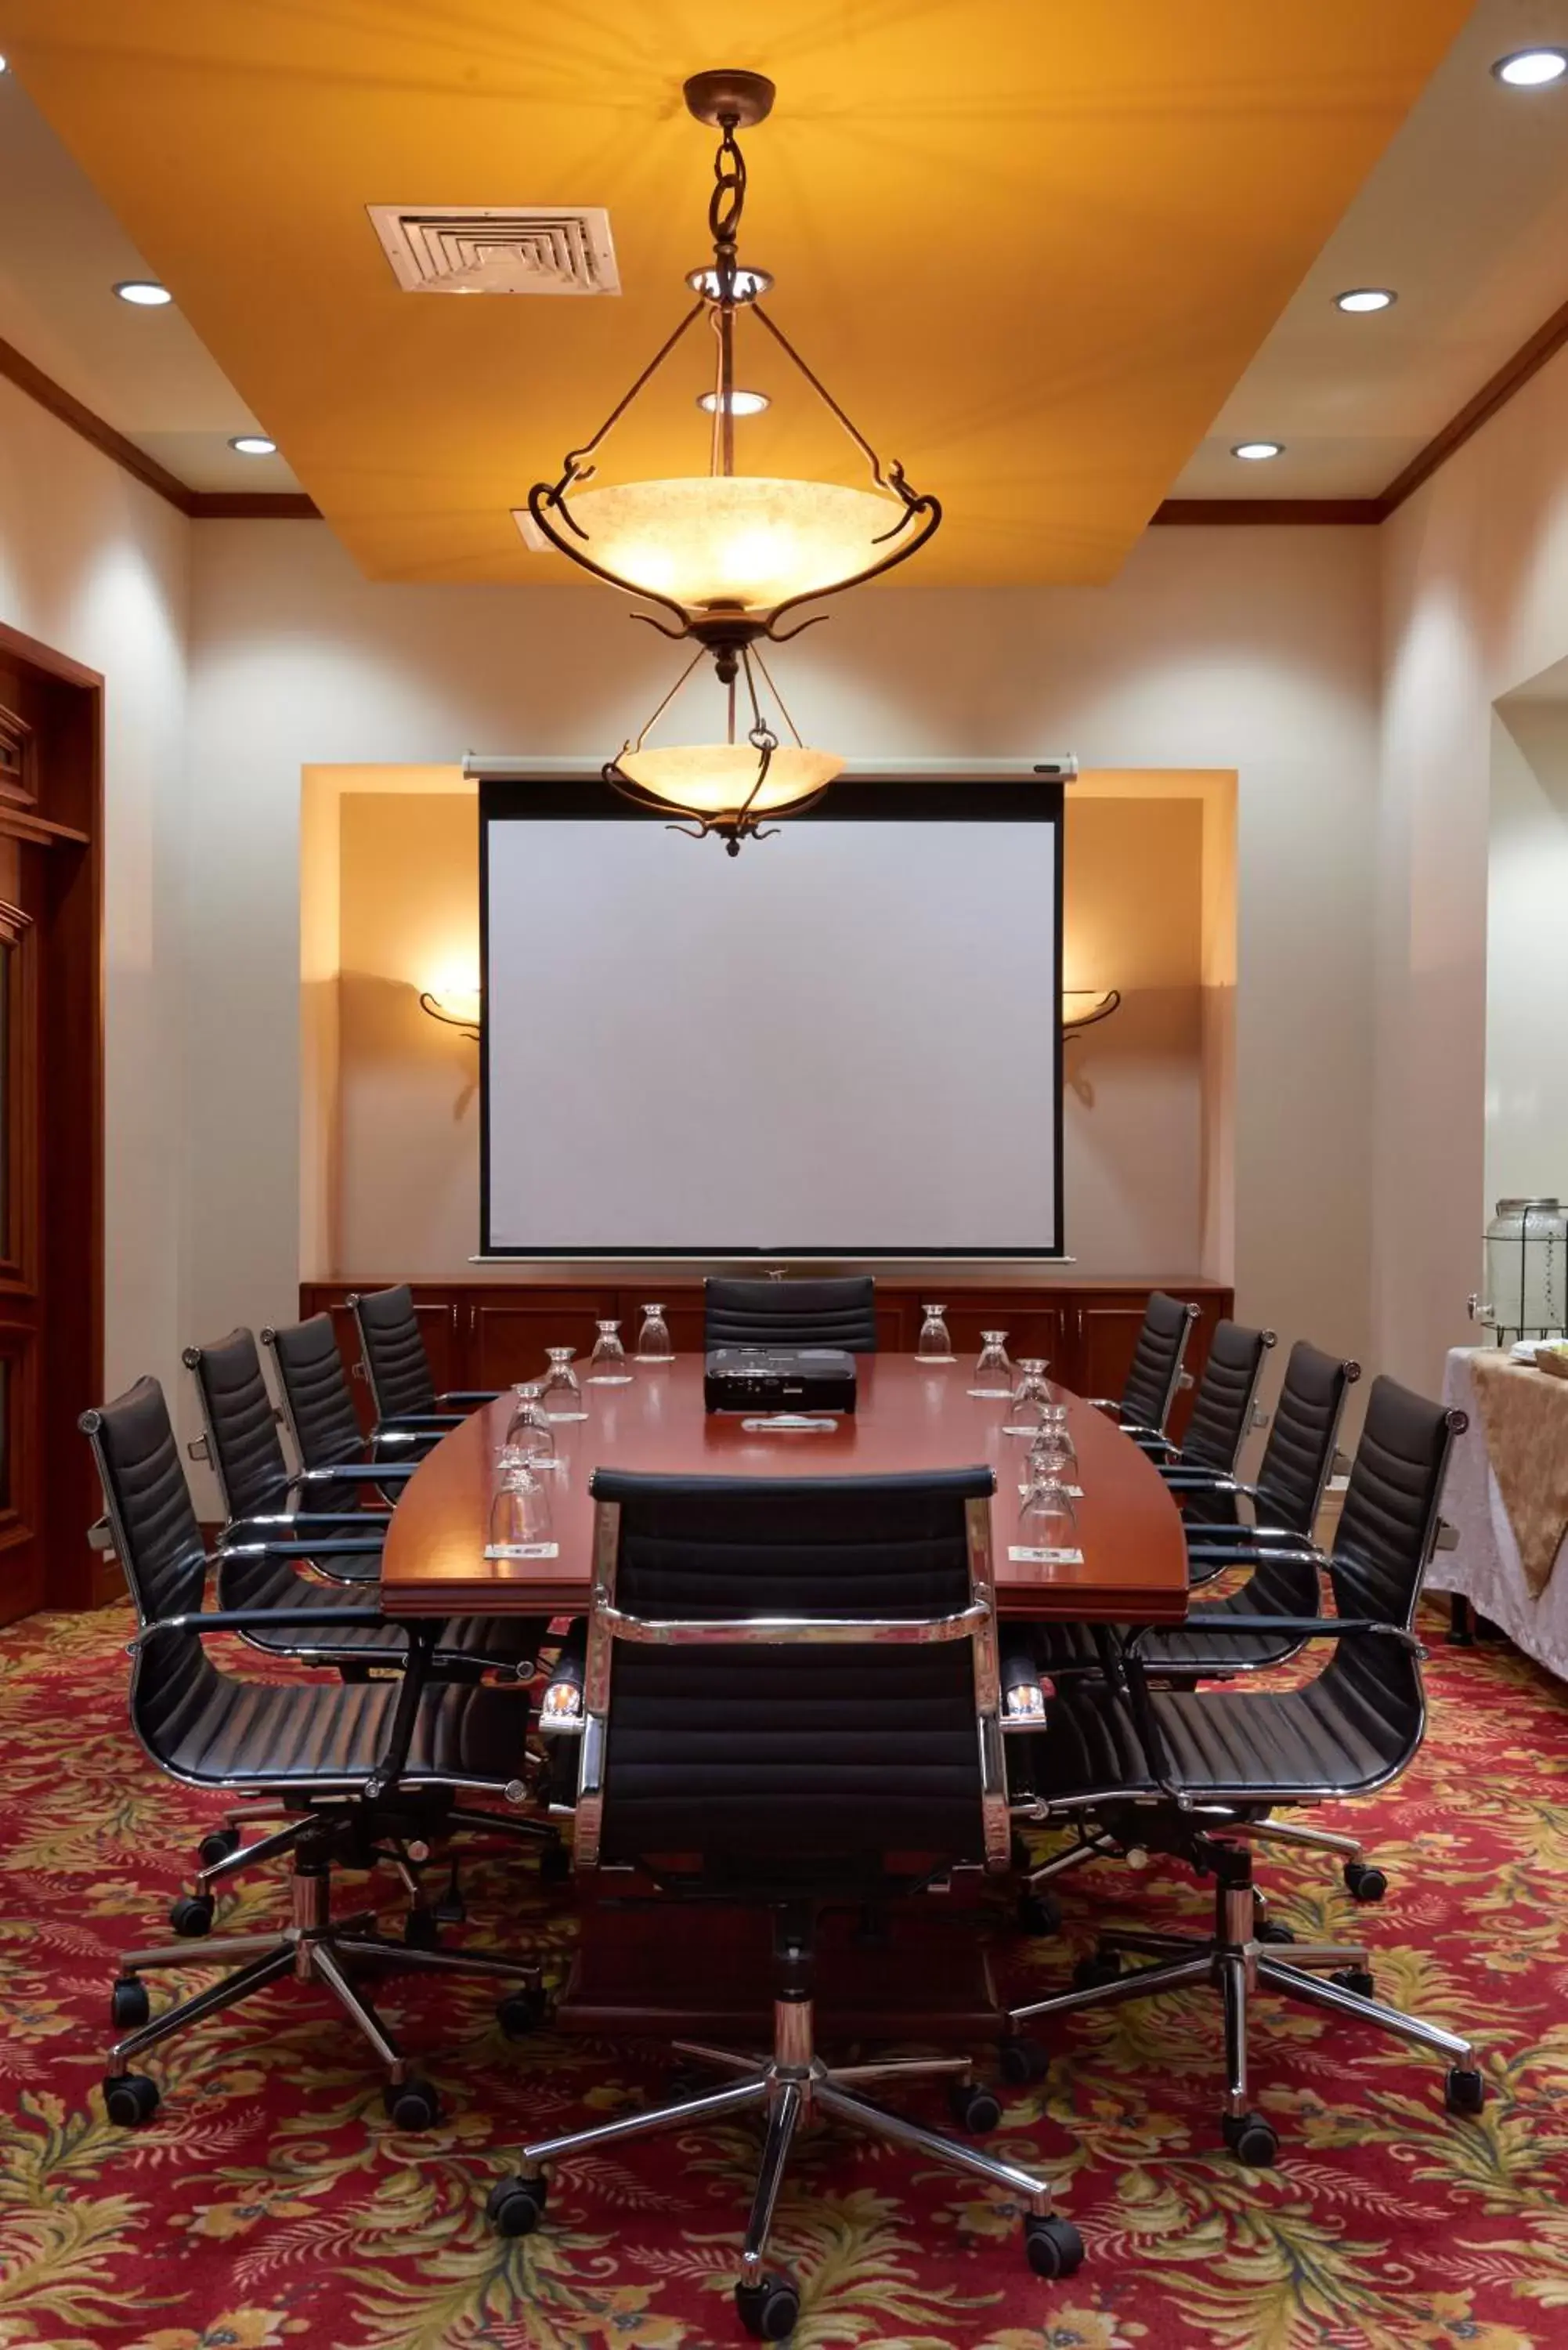 Meeting/conference room in Suites las Palmas, Hotel & Apartments.